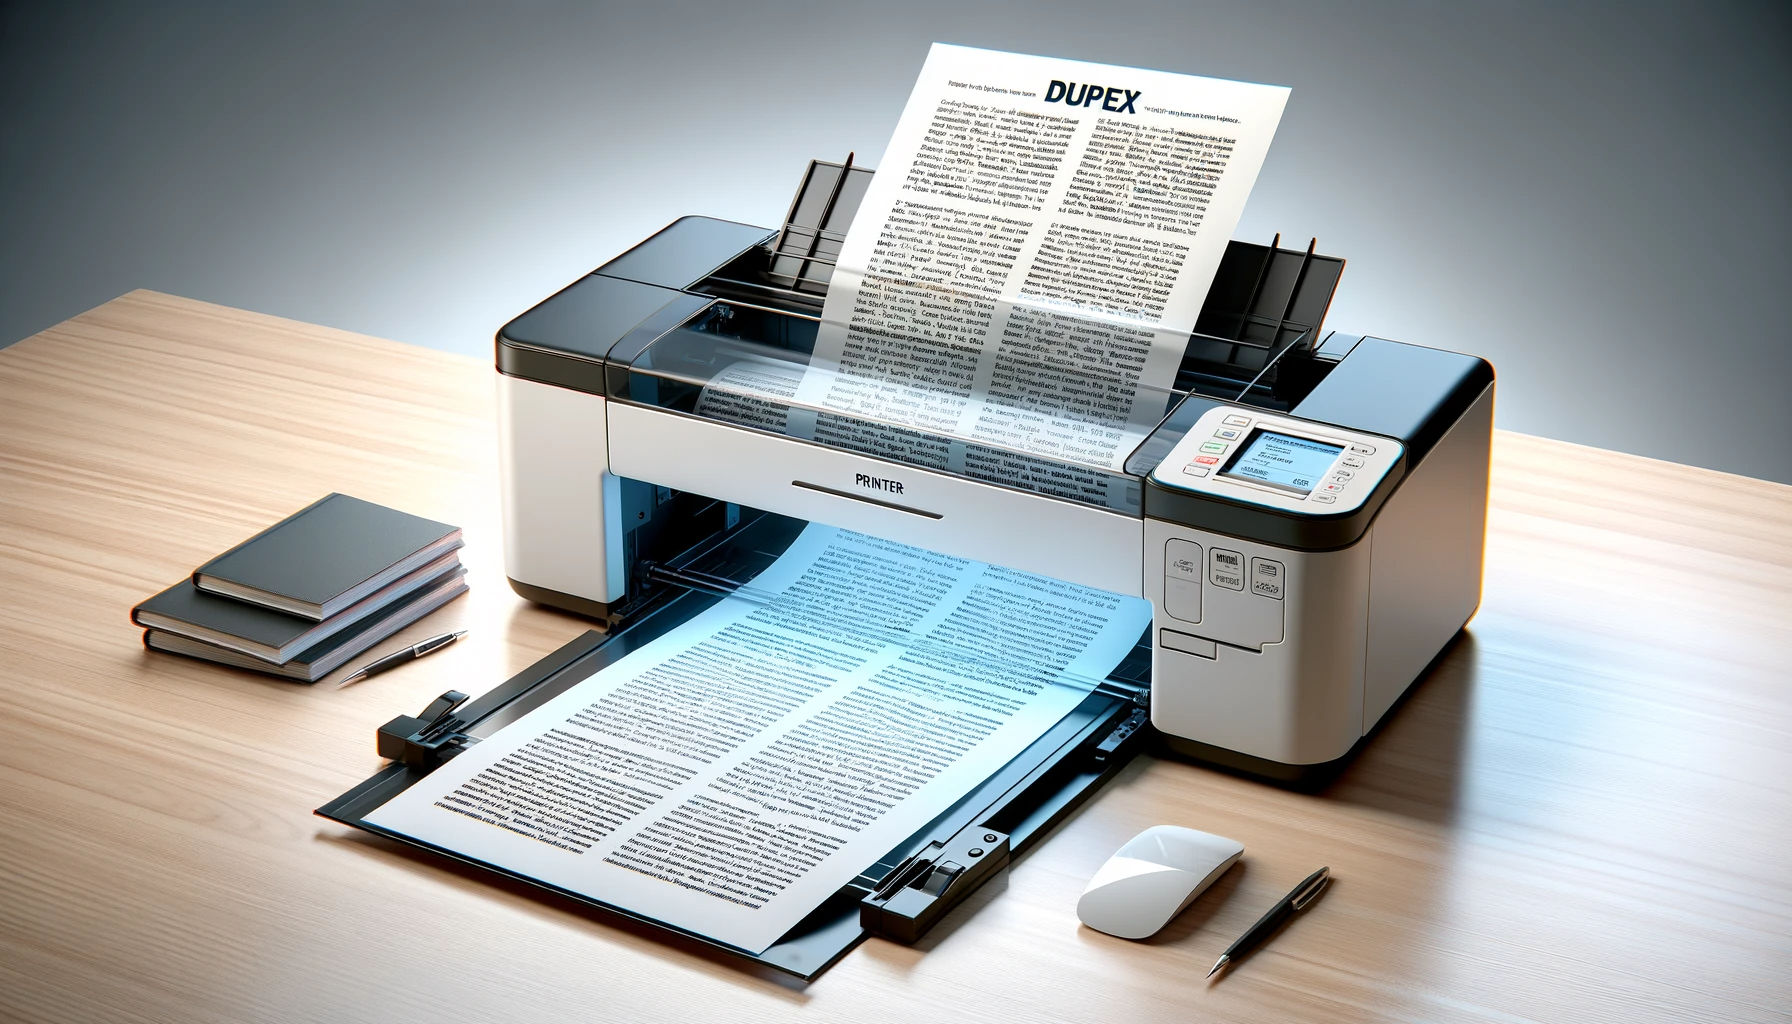 An image for duplex printing showing a printer with a page coming out that has text printed on both sides. The page should be partially out of the pri